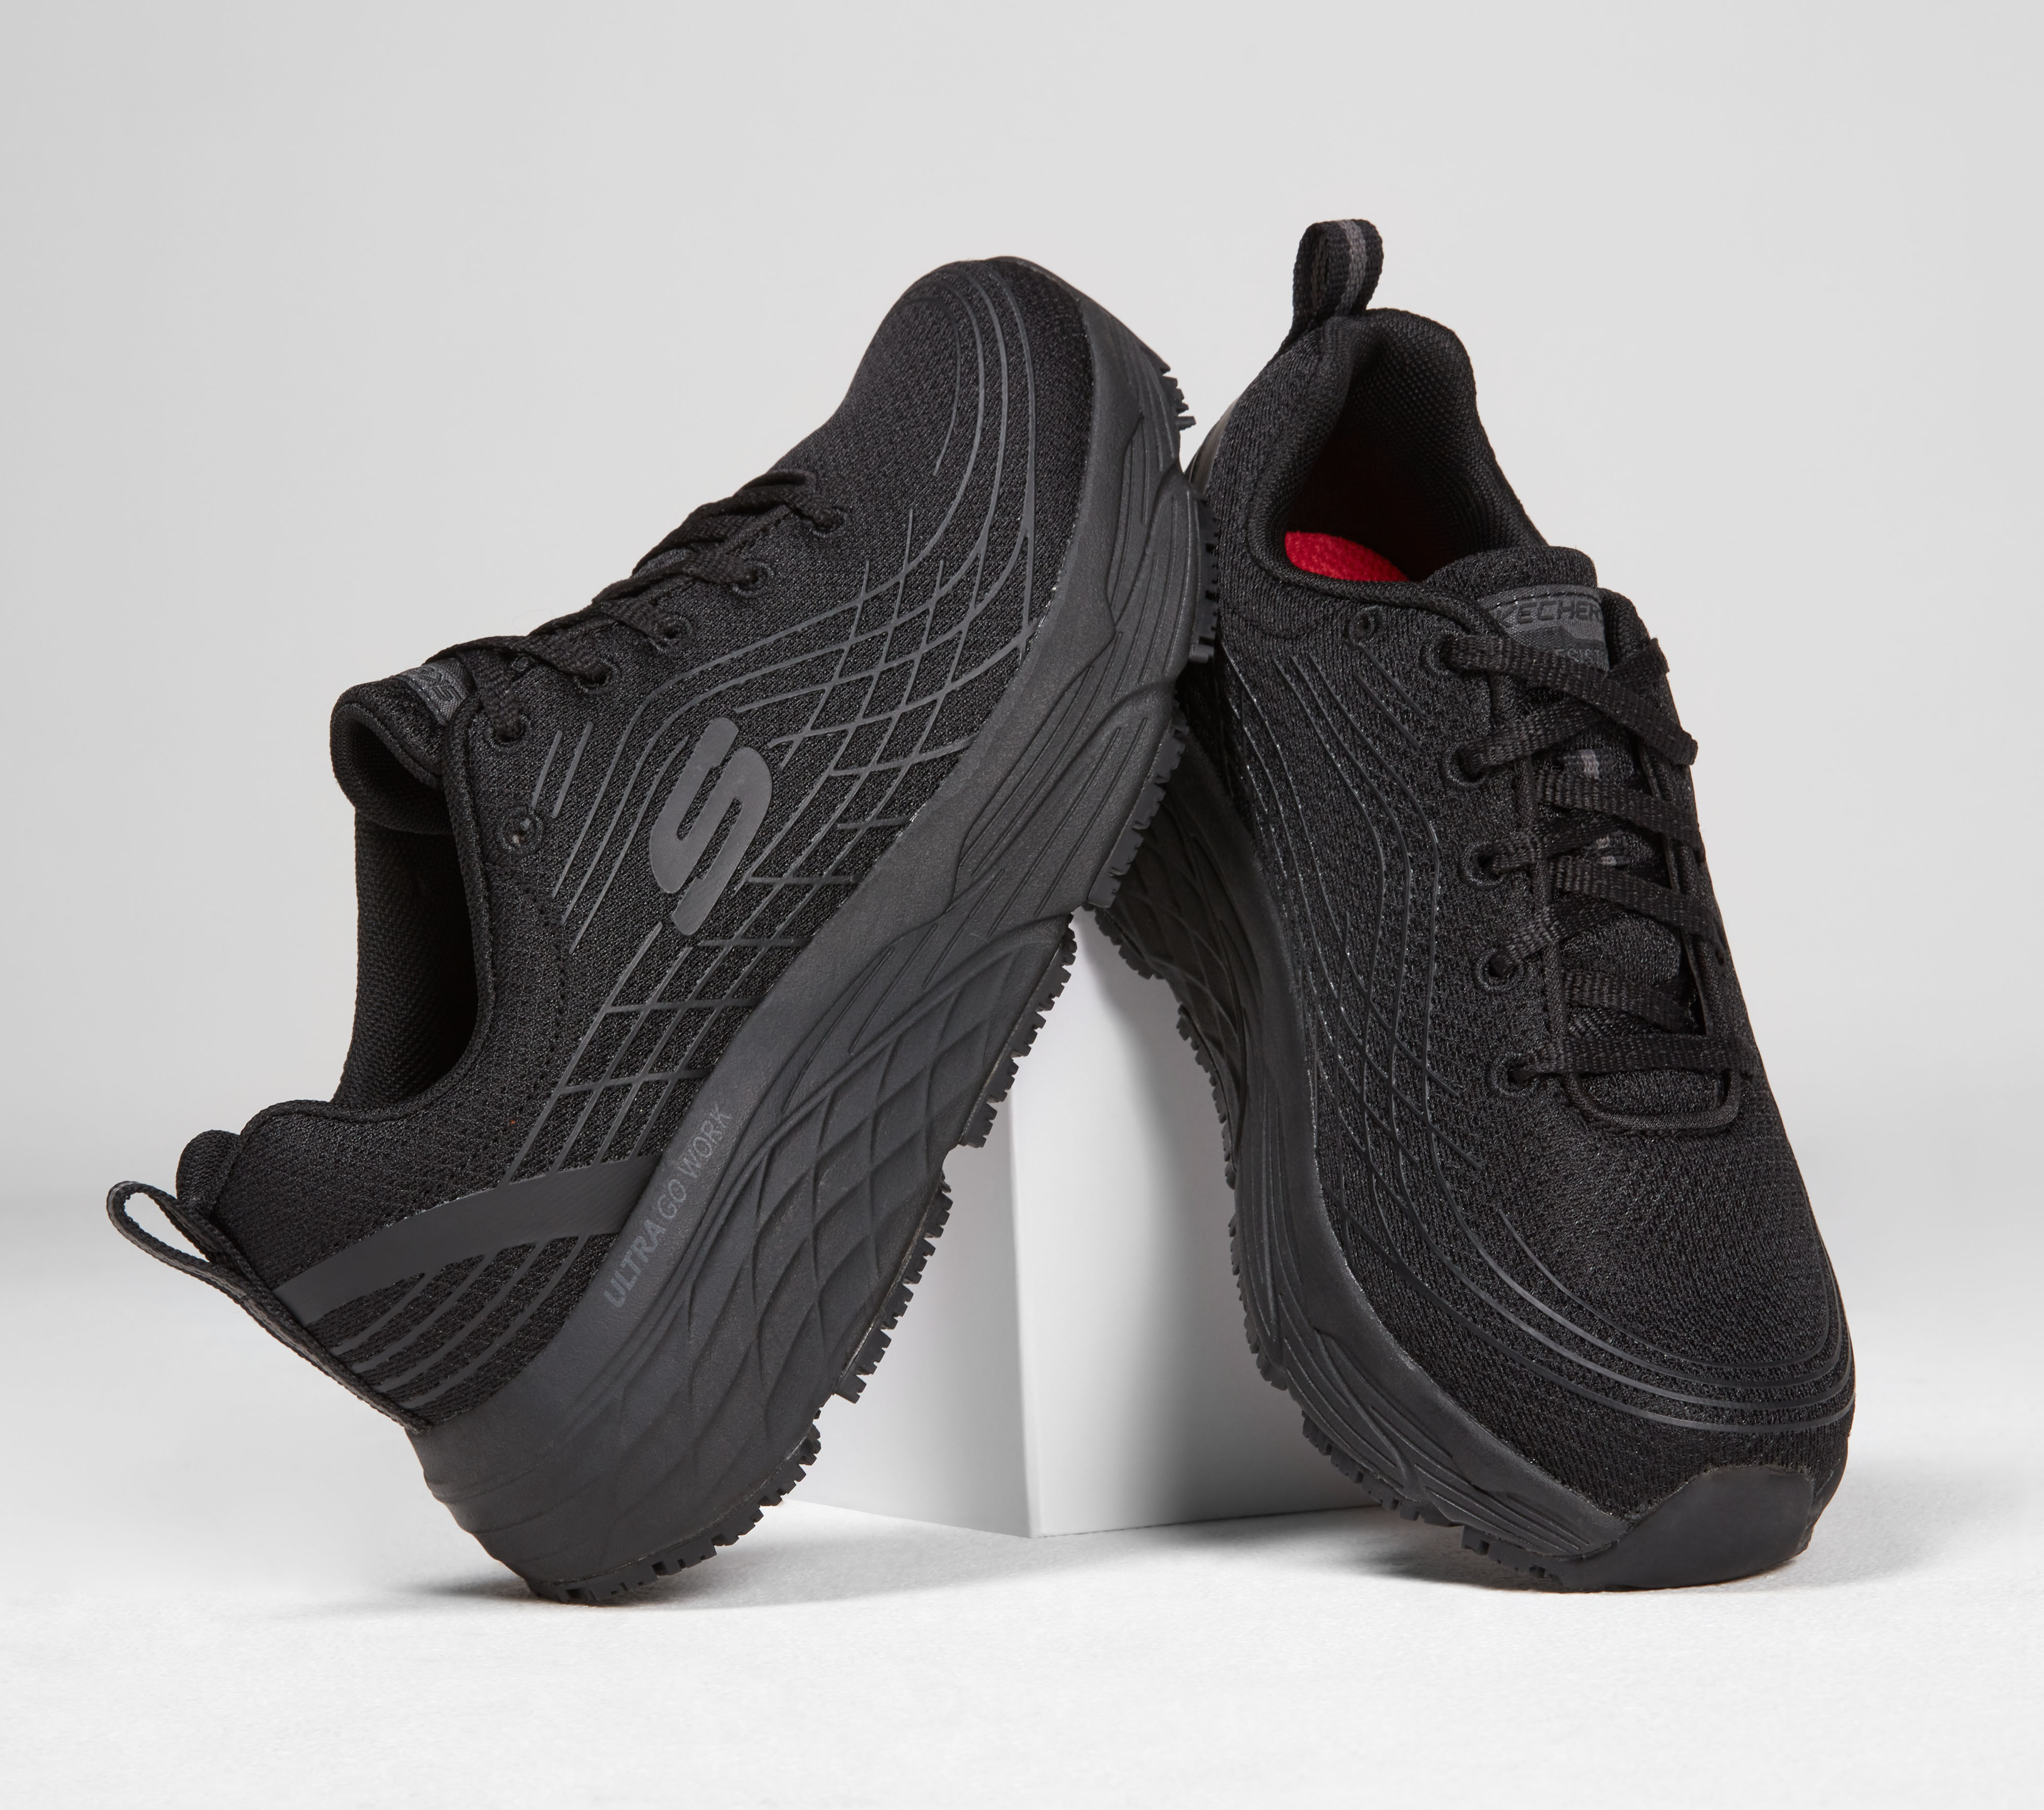 SKECHERS SR Elite | Fit: Max Work Relaxed Cushioning